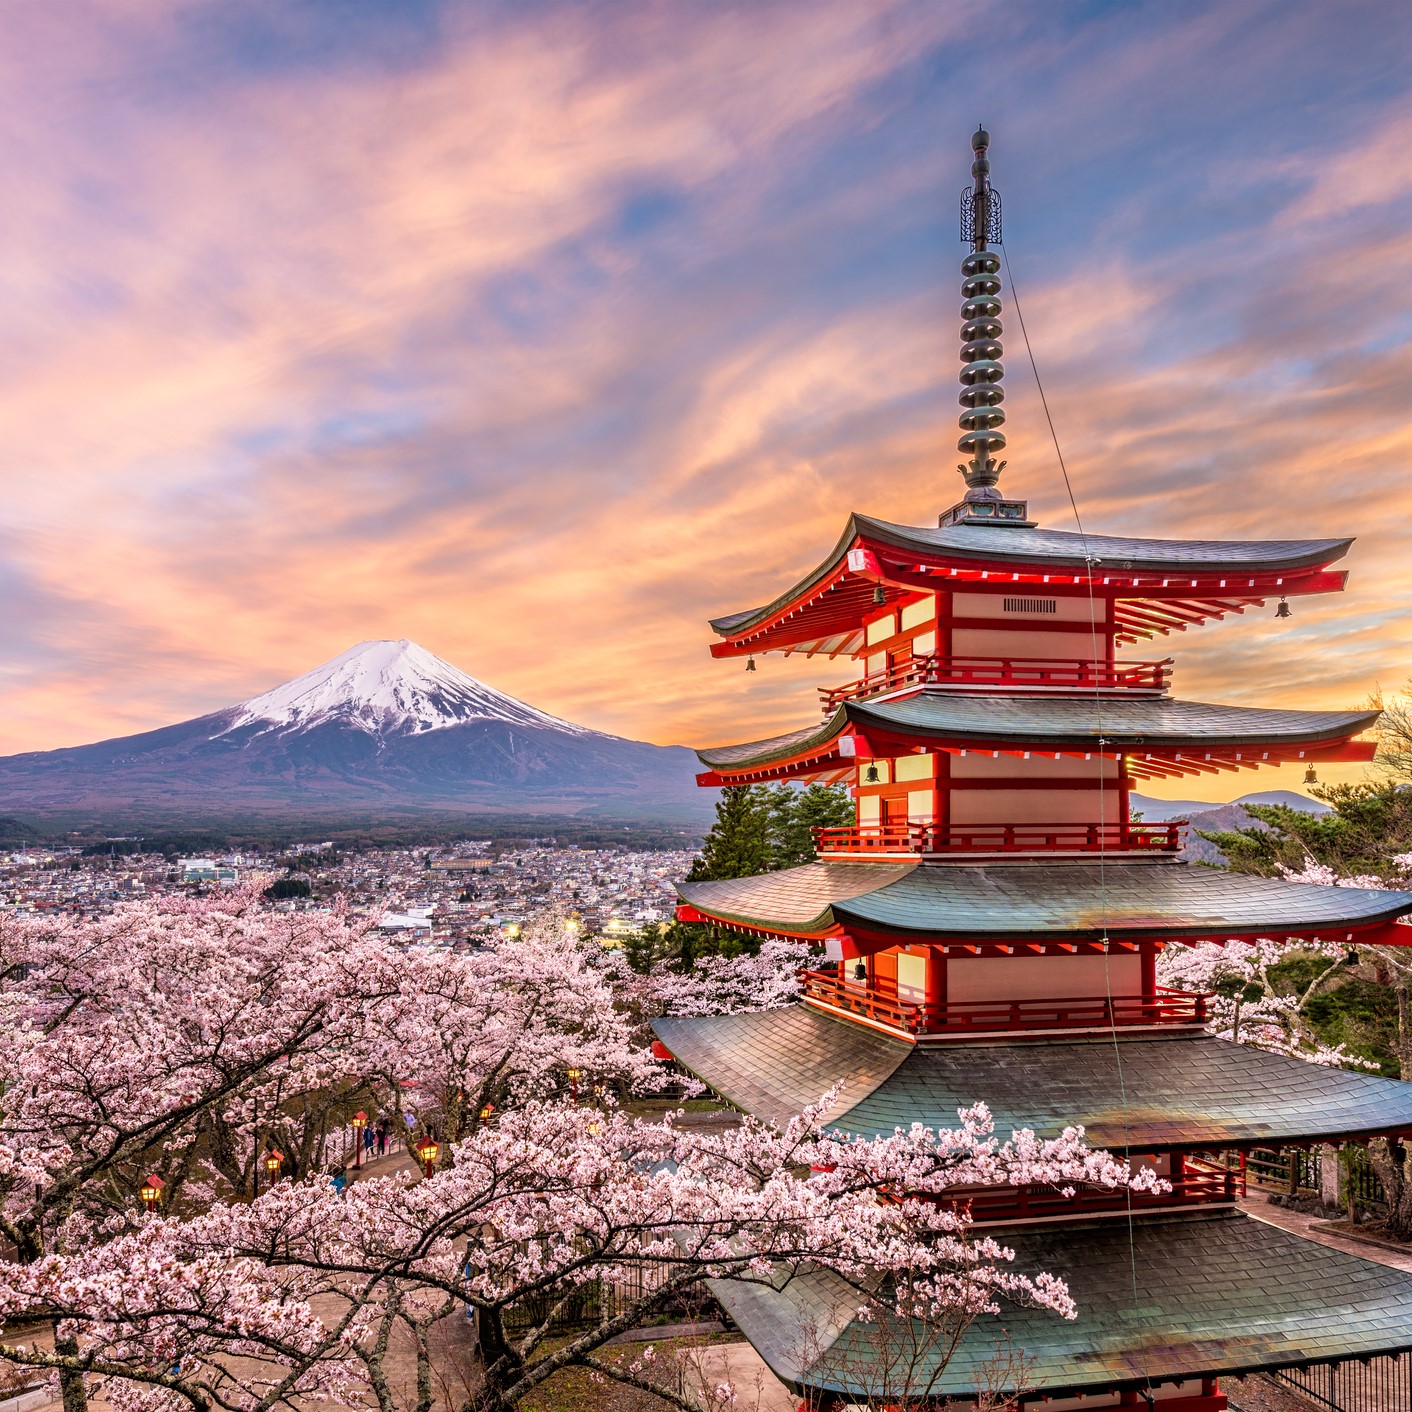 Zipair: Los Angeles to Tokyo for $670 round-trip